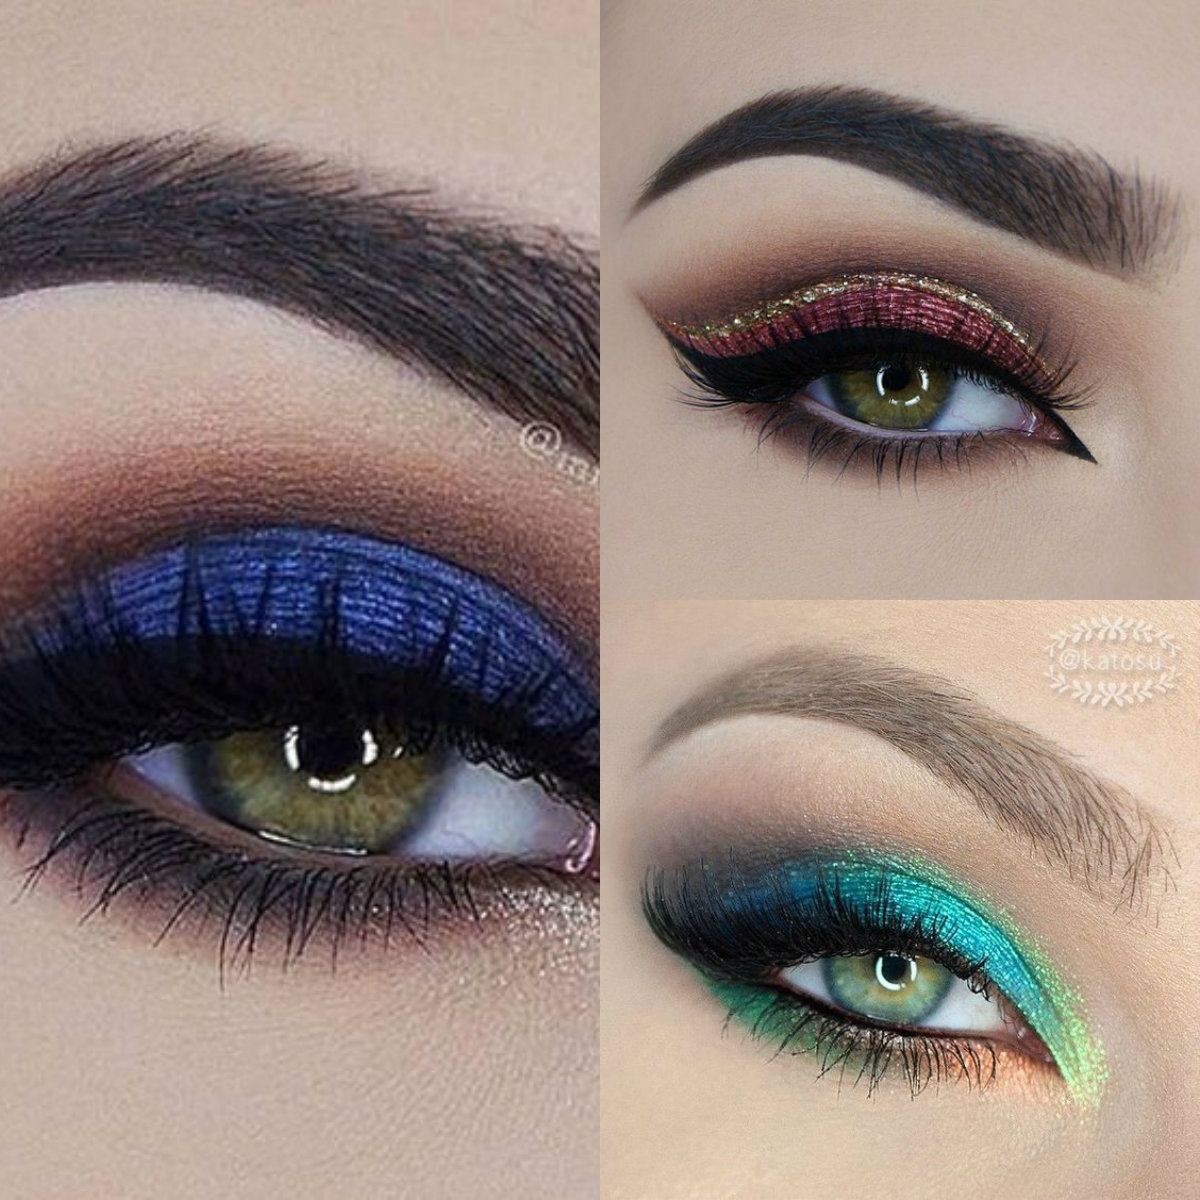 Formal Eye Makeup Style Up Your Formal Look With Colorful Smokey Eye Makeup